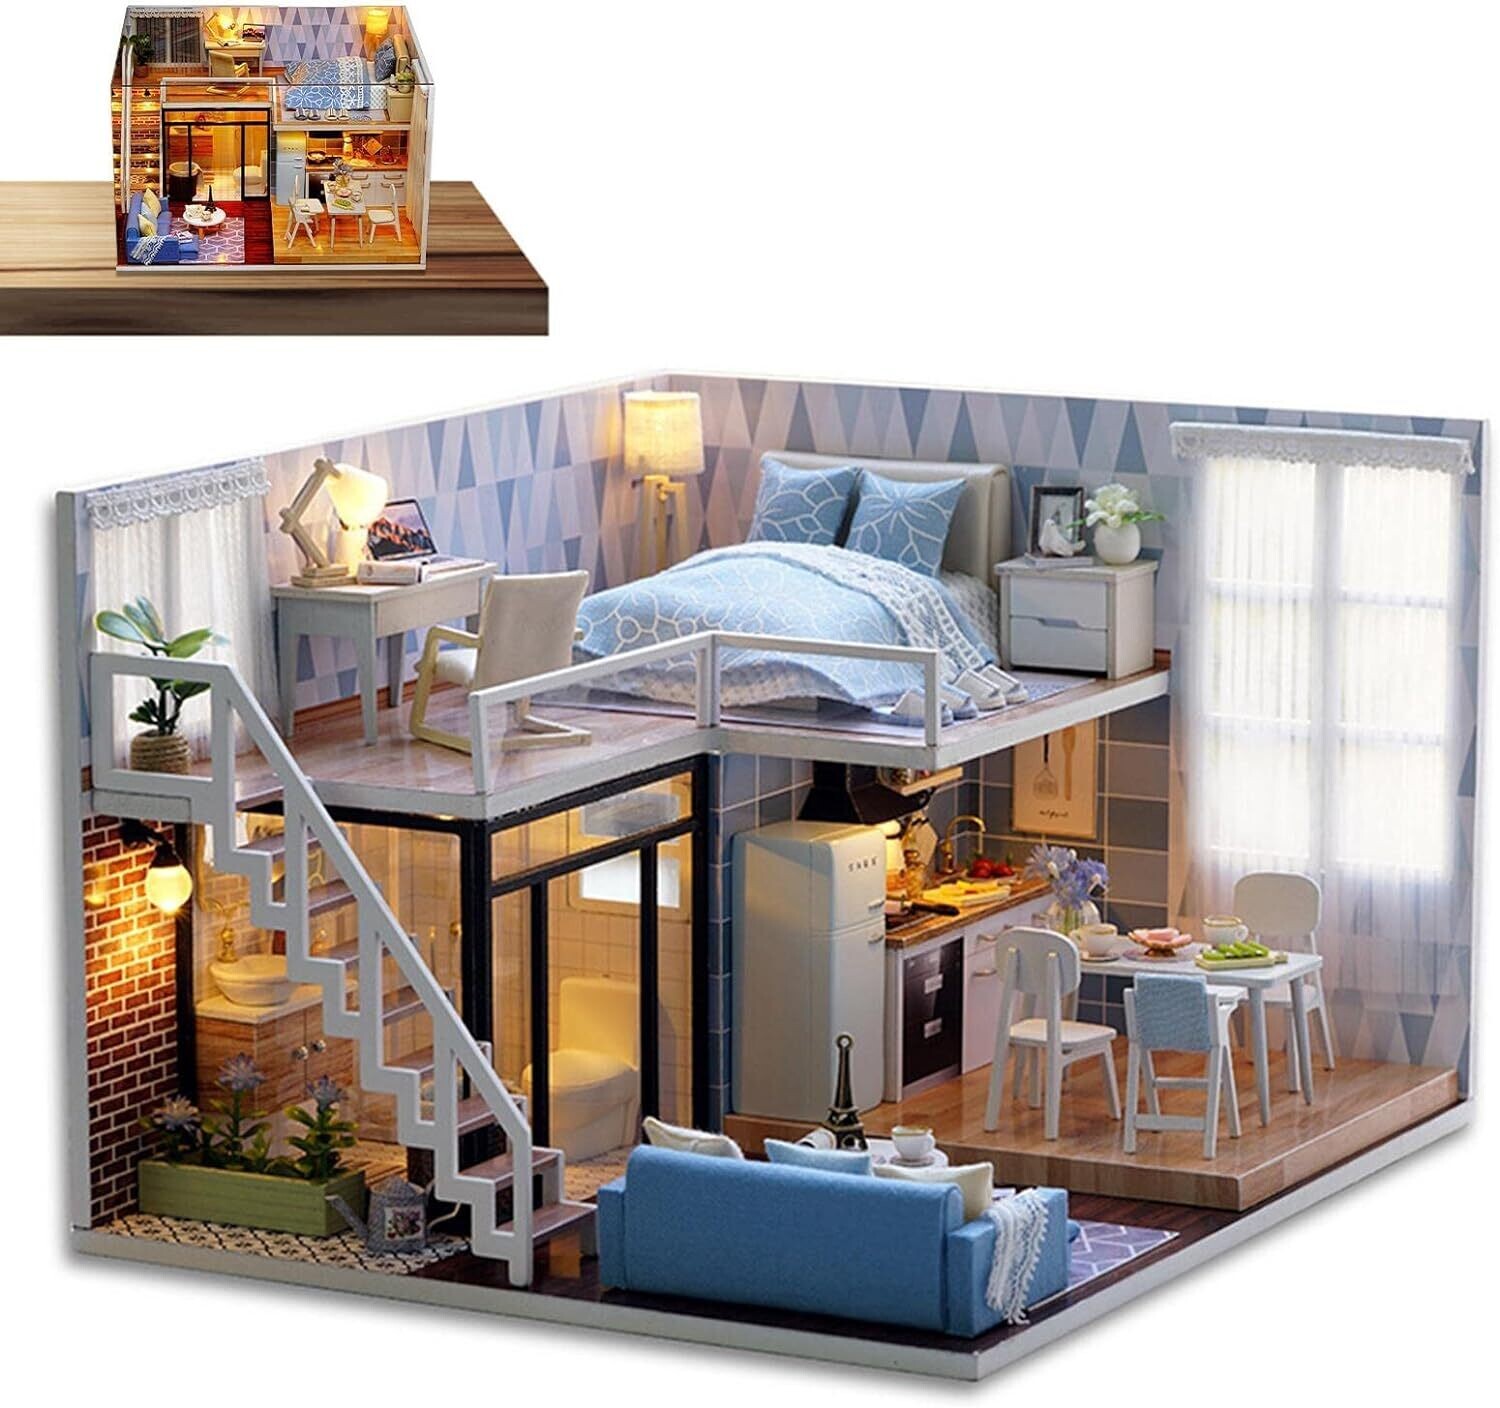 Wooden Doll House Furniture House Kit DIY Miniature House Dollhouse Construction Kit Dollhouse Miniature DIY House Building Kit Creative Room with Furniture